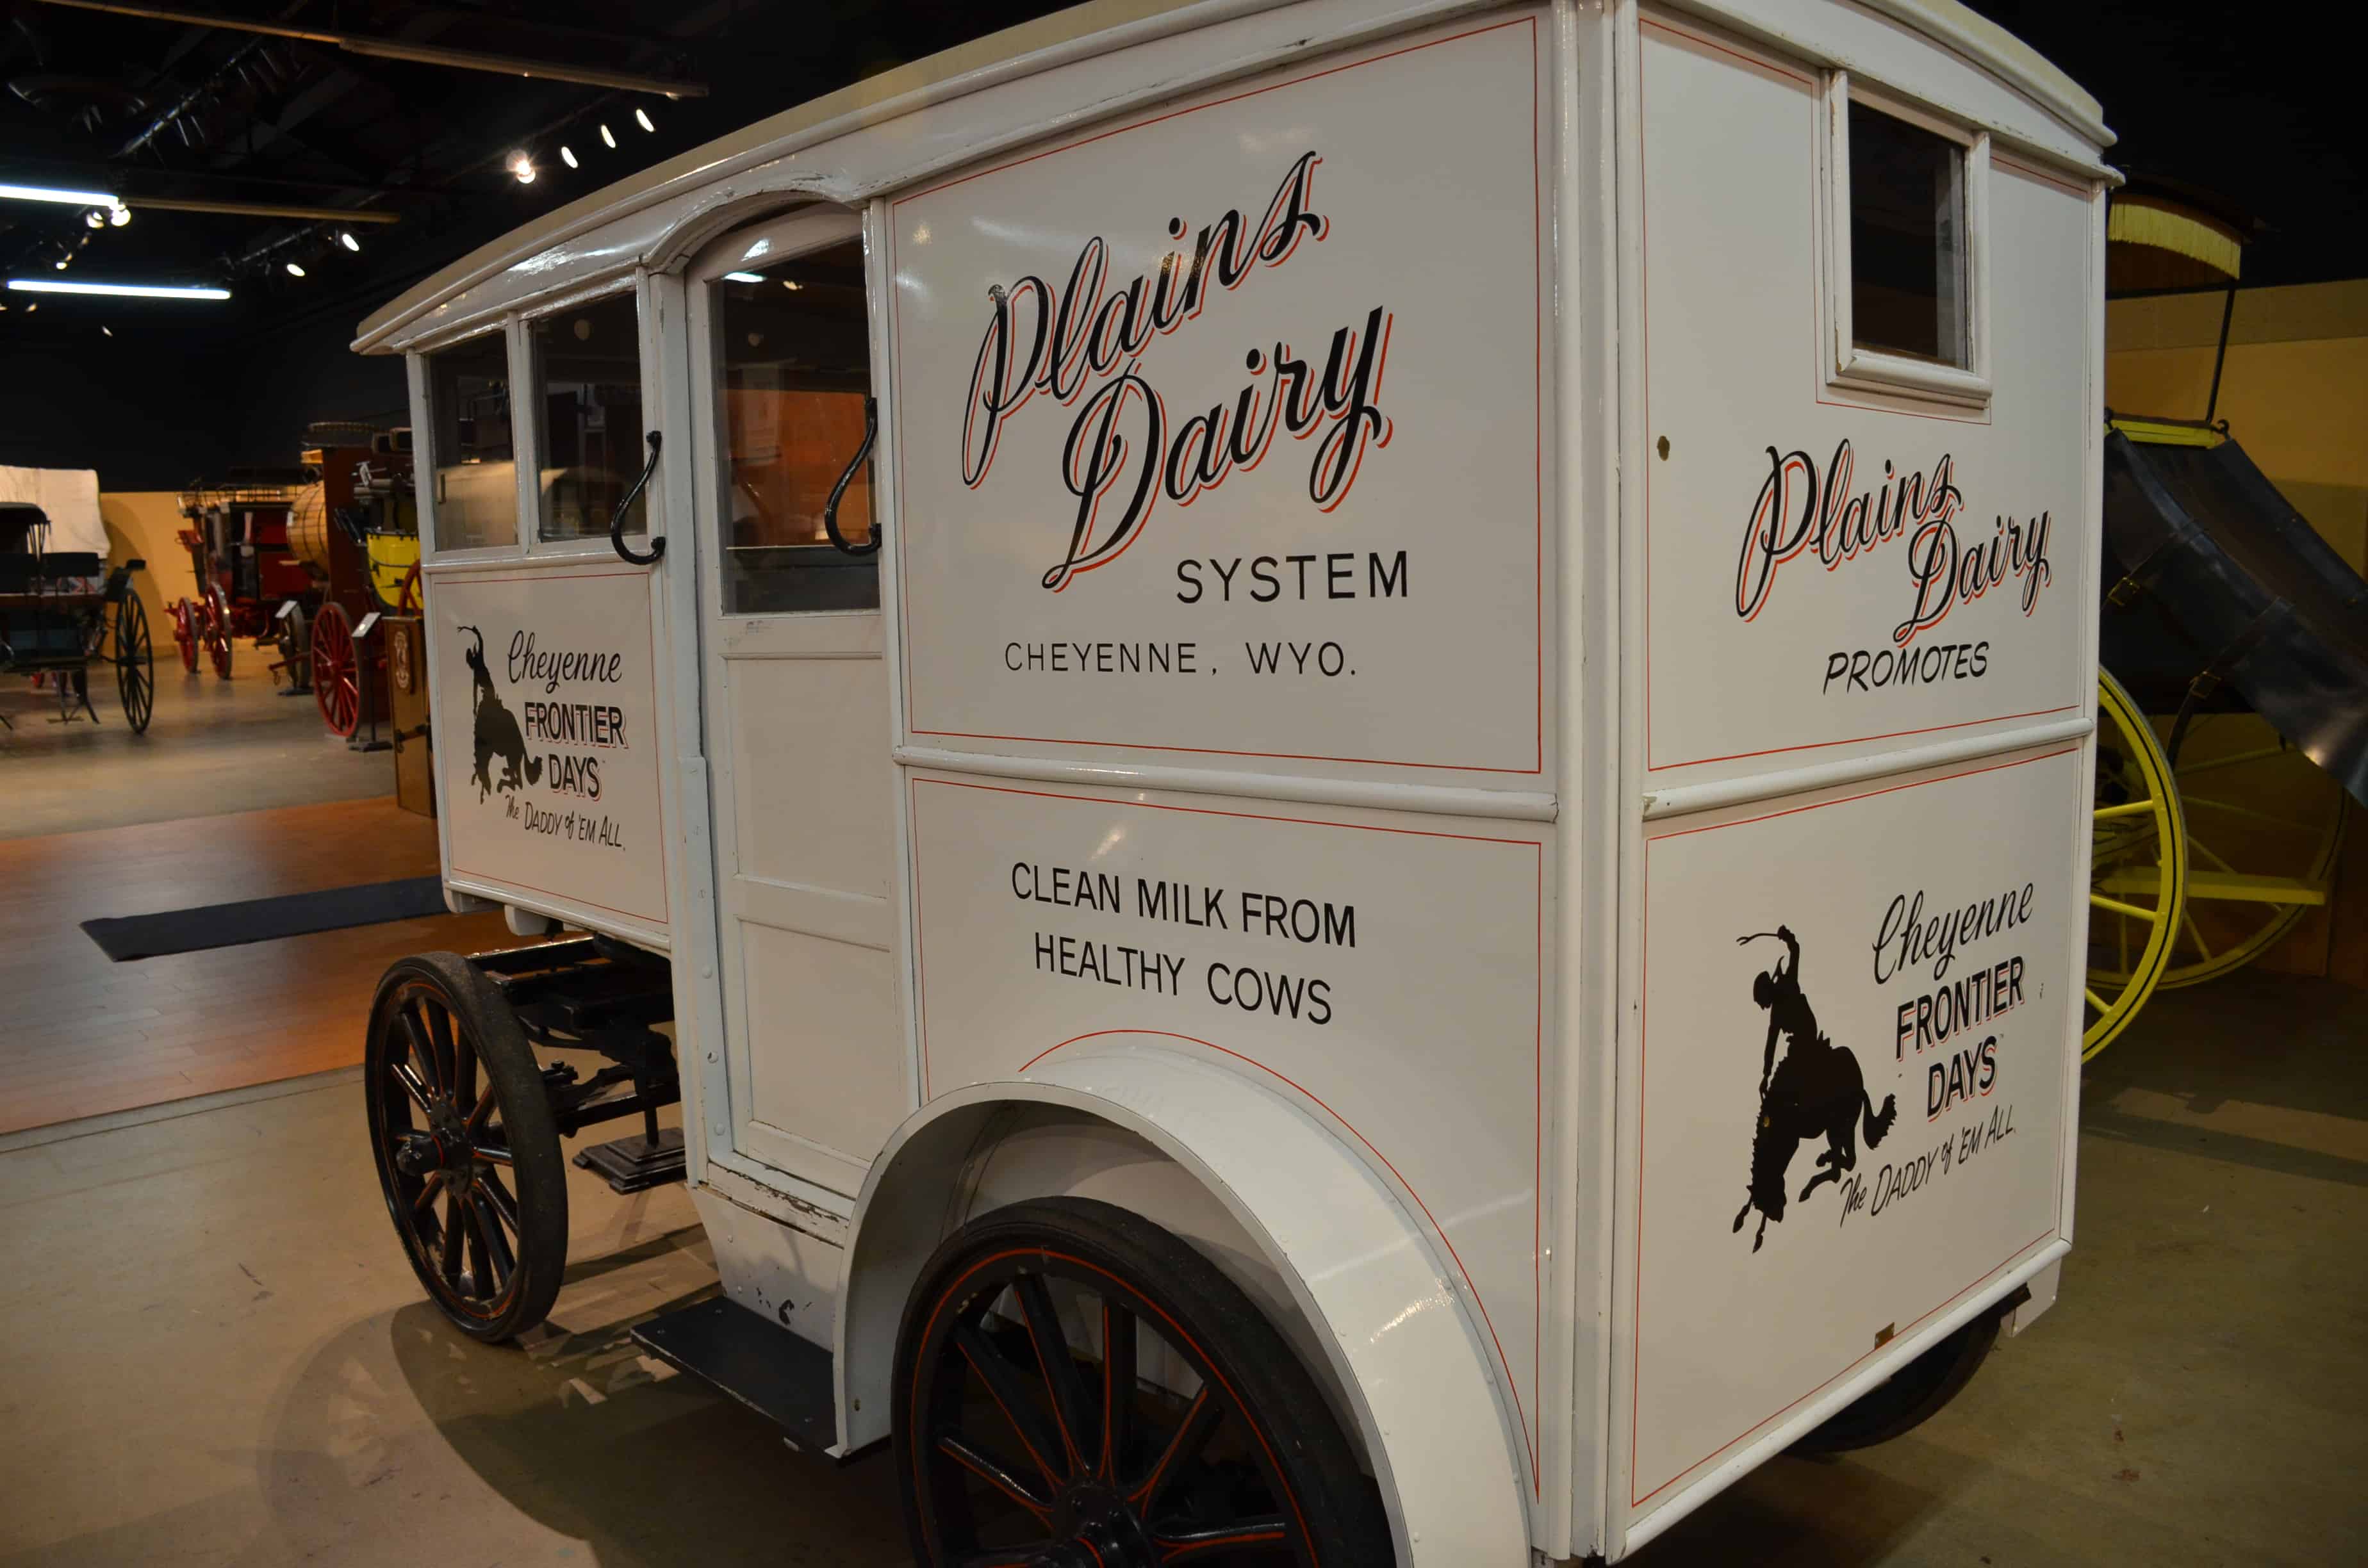 Dairy wagon at the Cheyenne Frontier Days Old West Museum in Wyoming